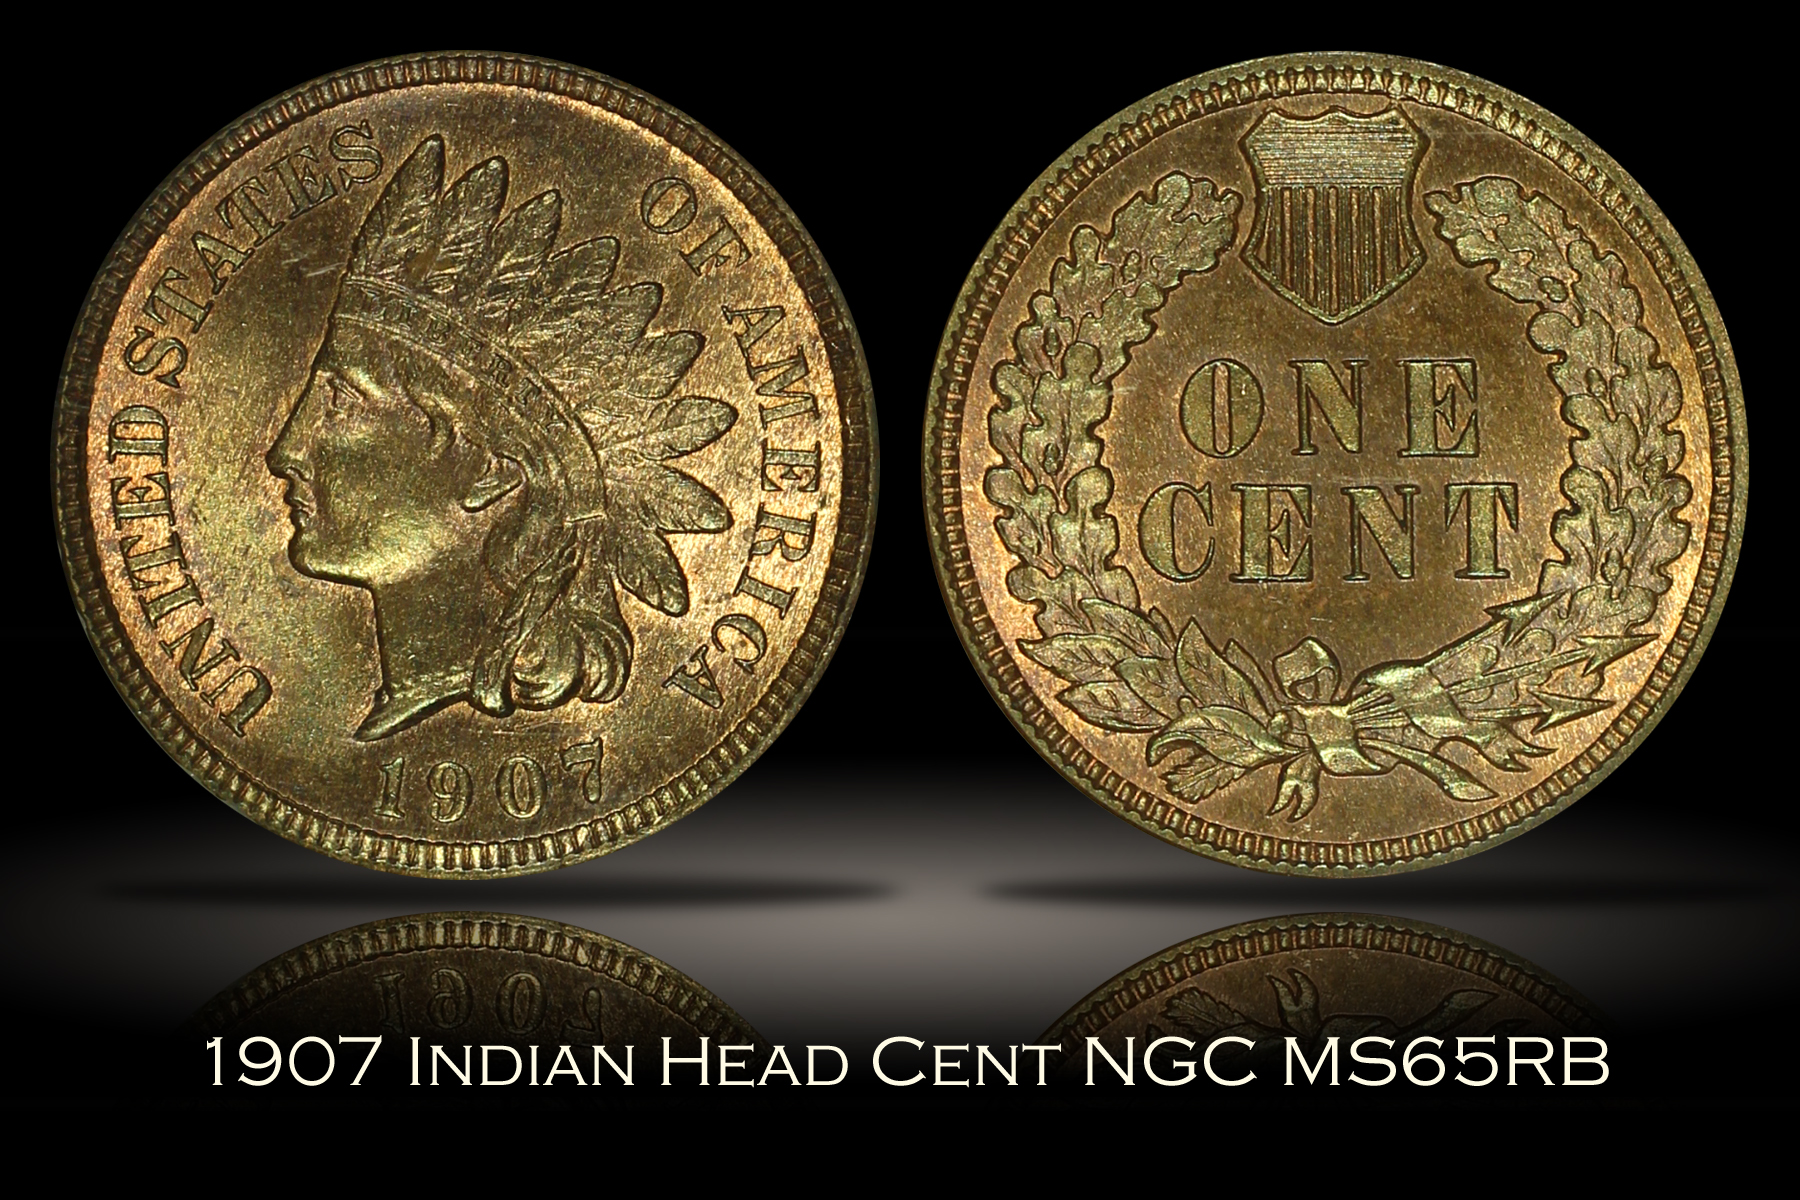 1907 Indian Head Cent NGC MS65RB